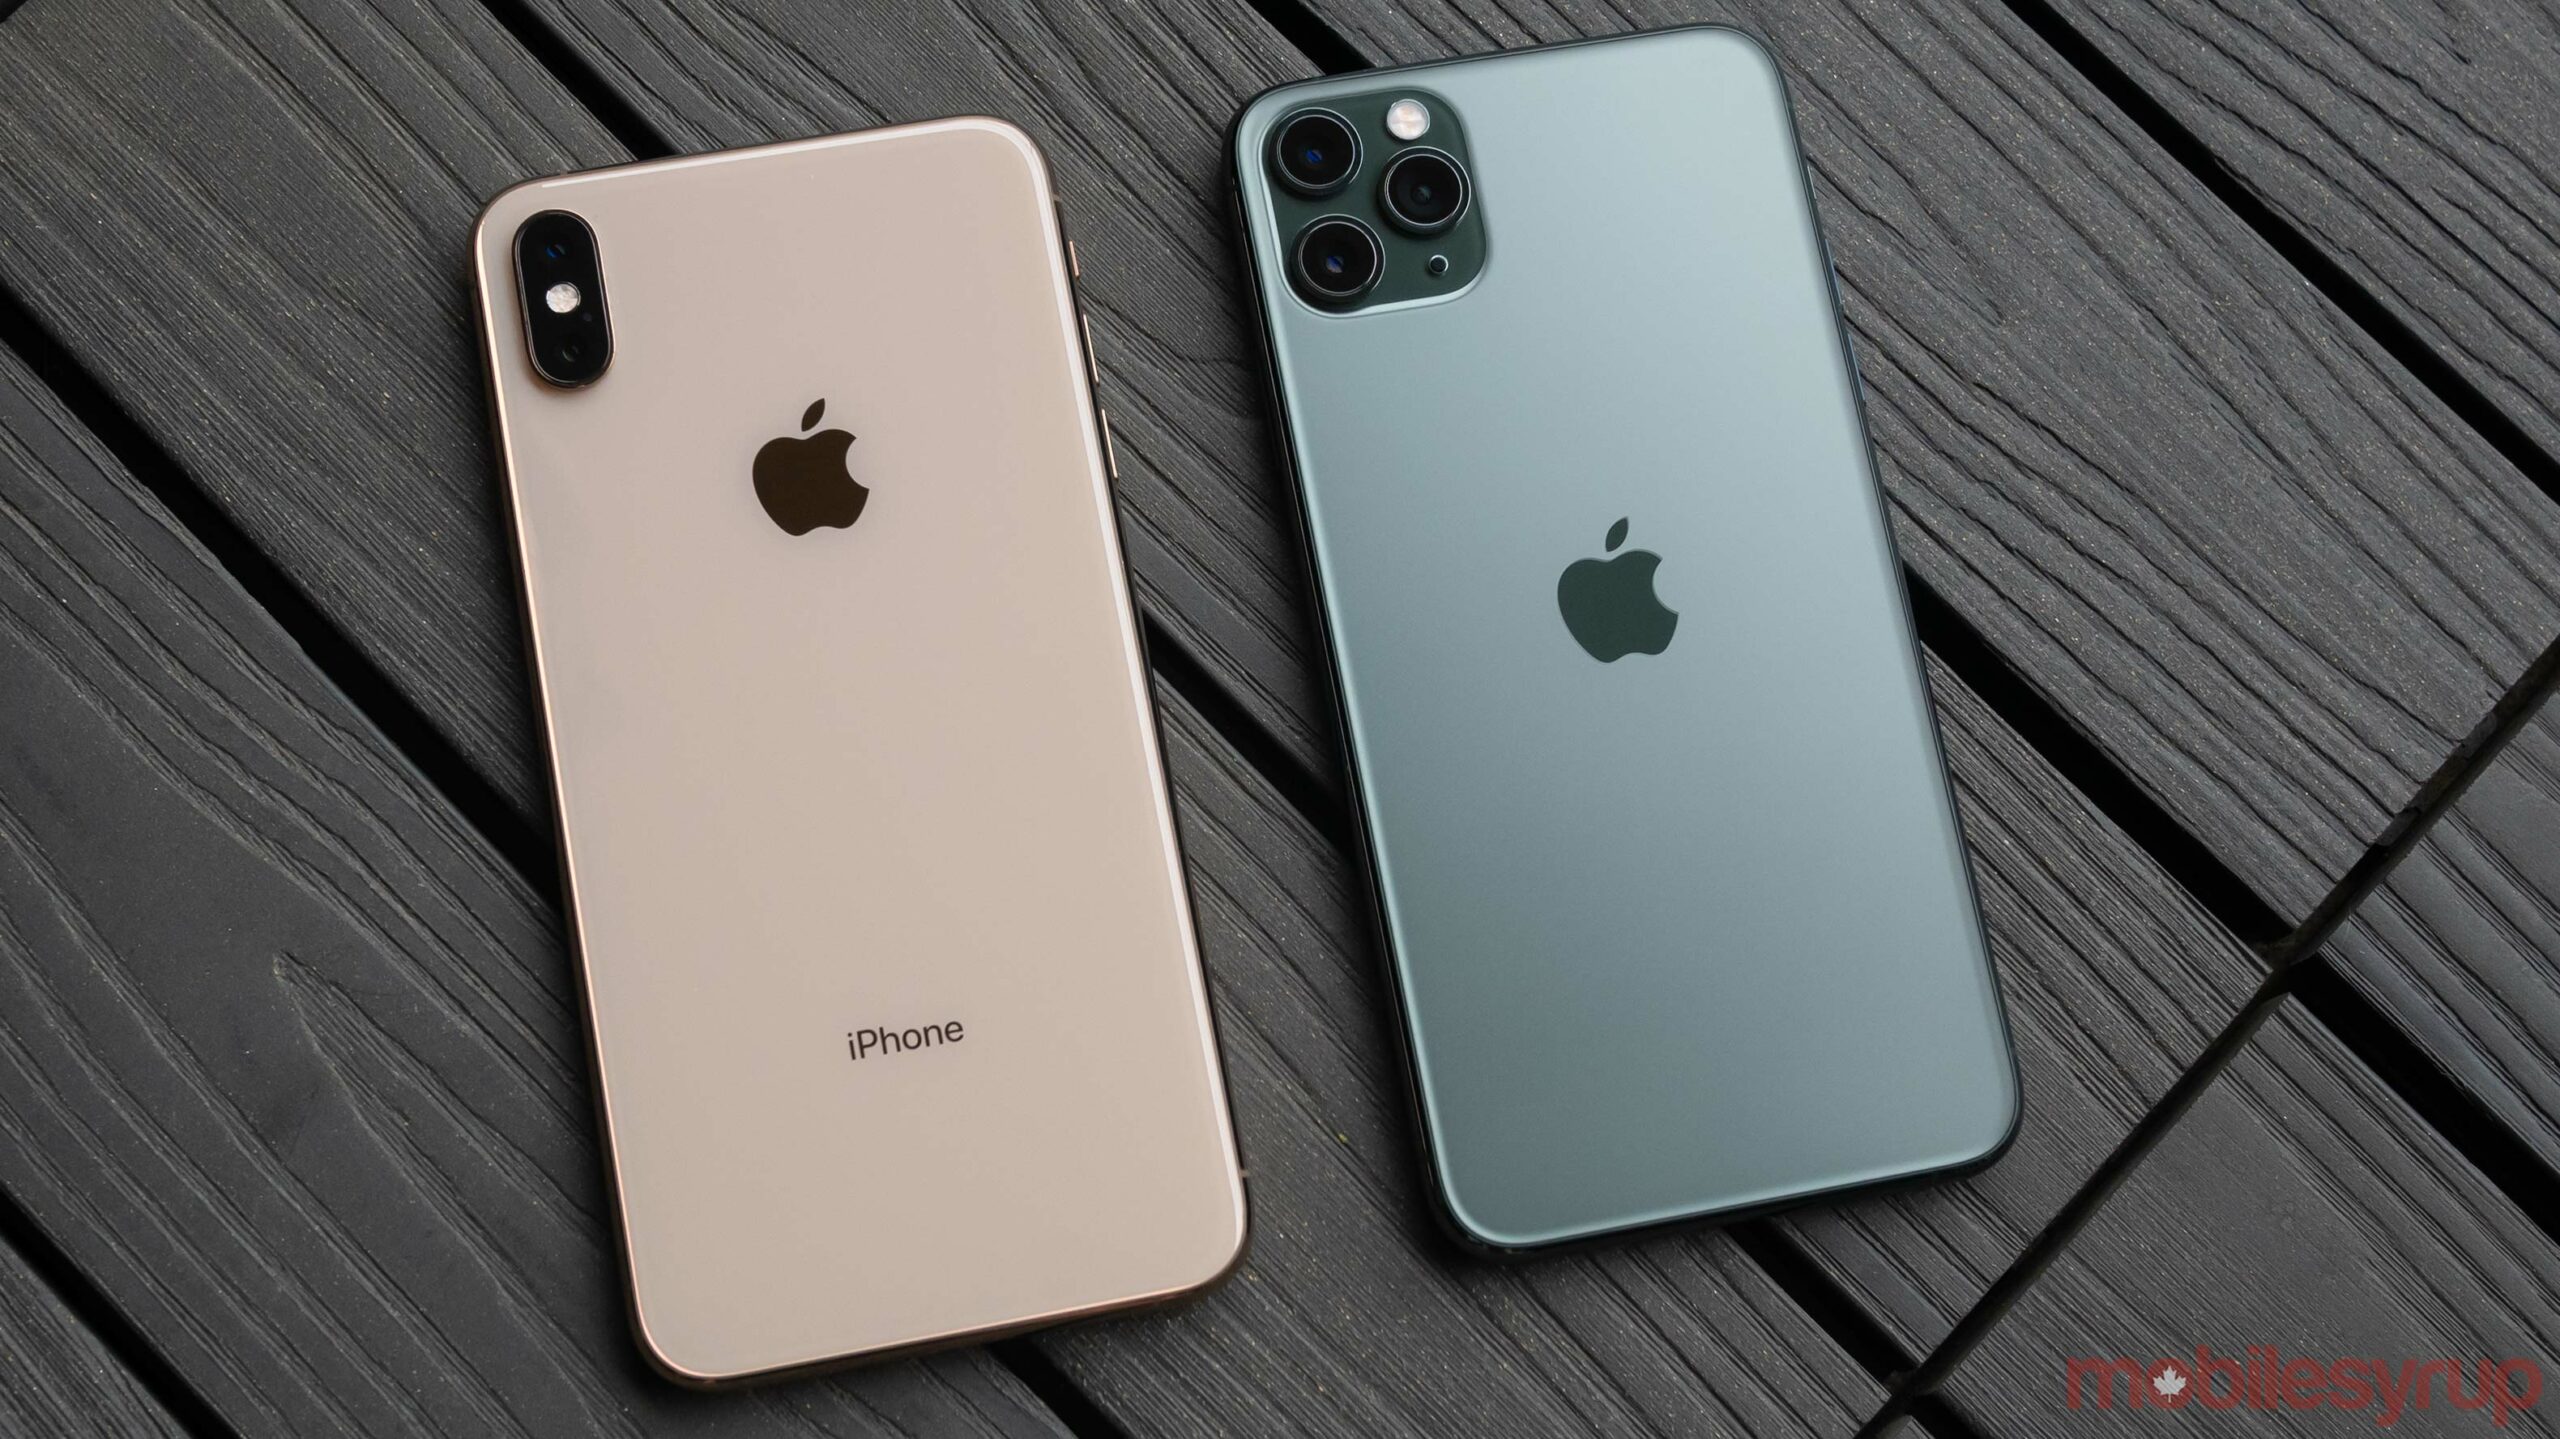 iPhone 11 Pro Max and iPhone XS Max